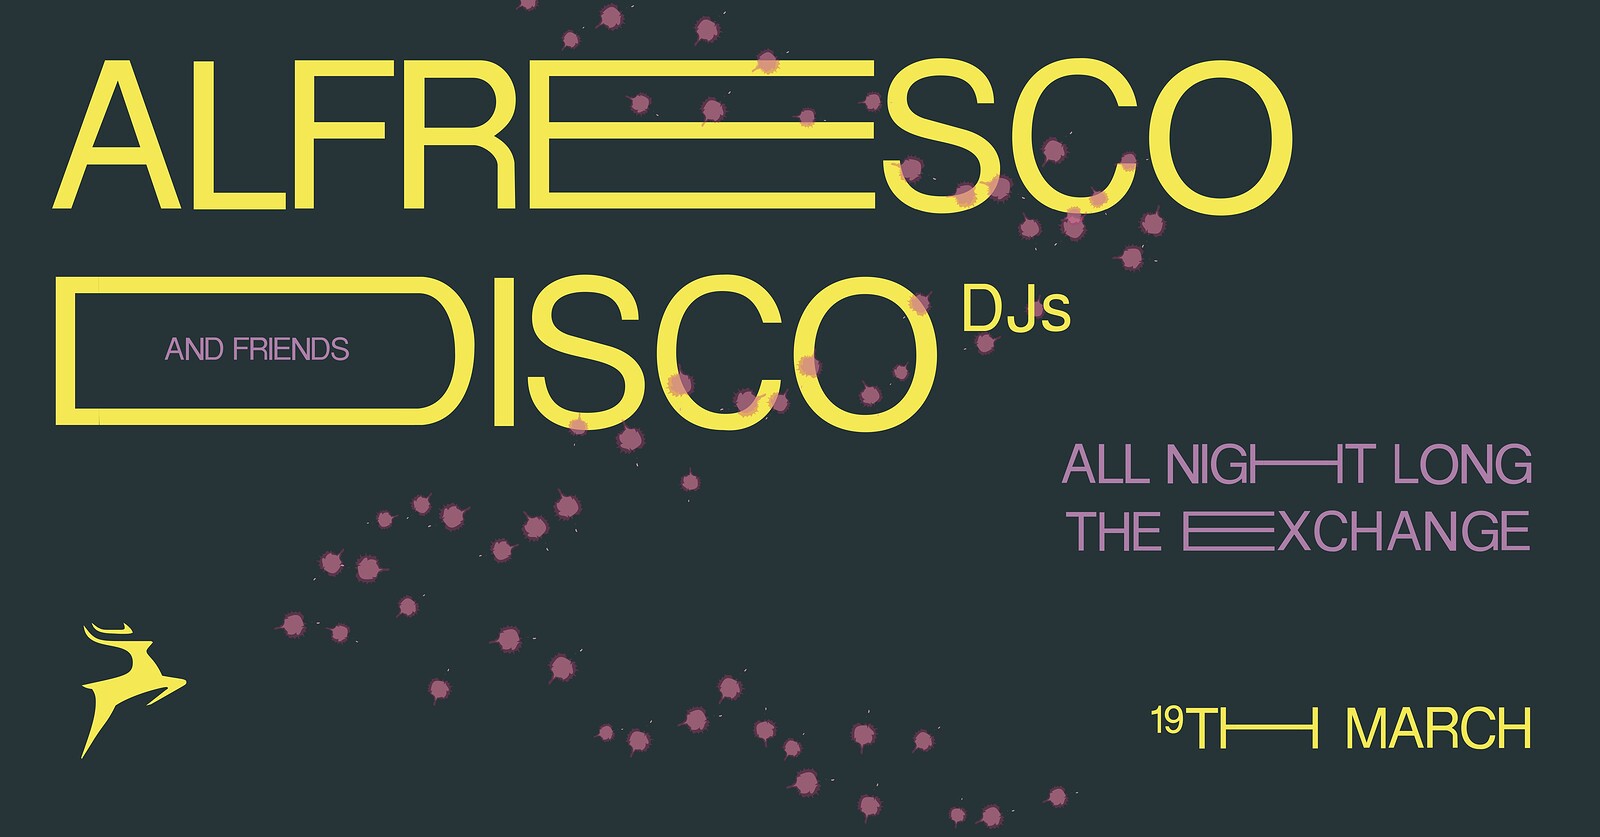 Alfresco Disco & friends all night long at Exchange